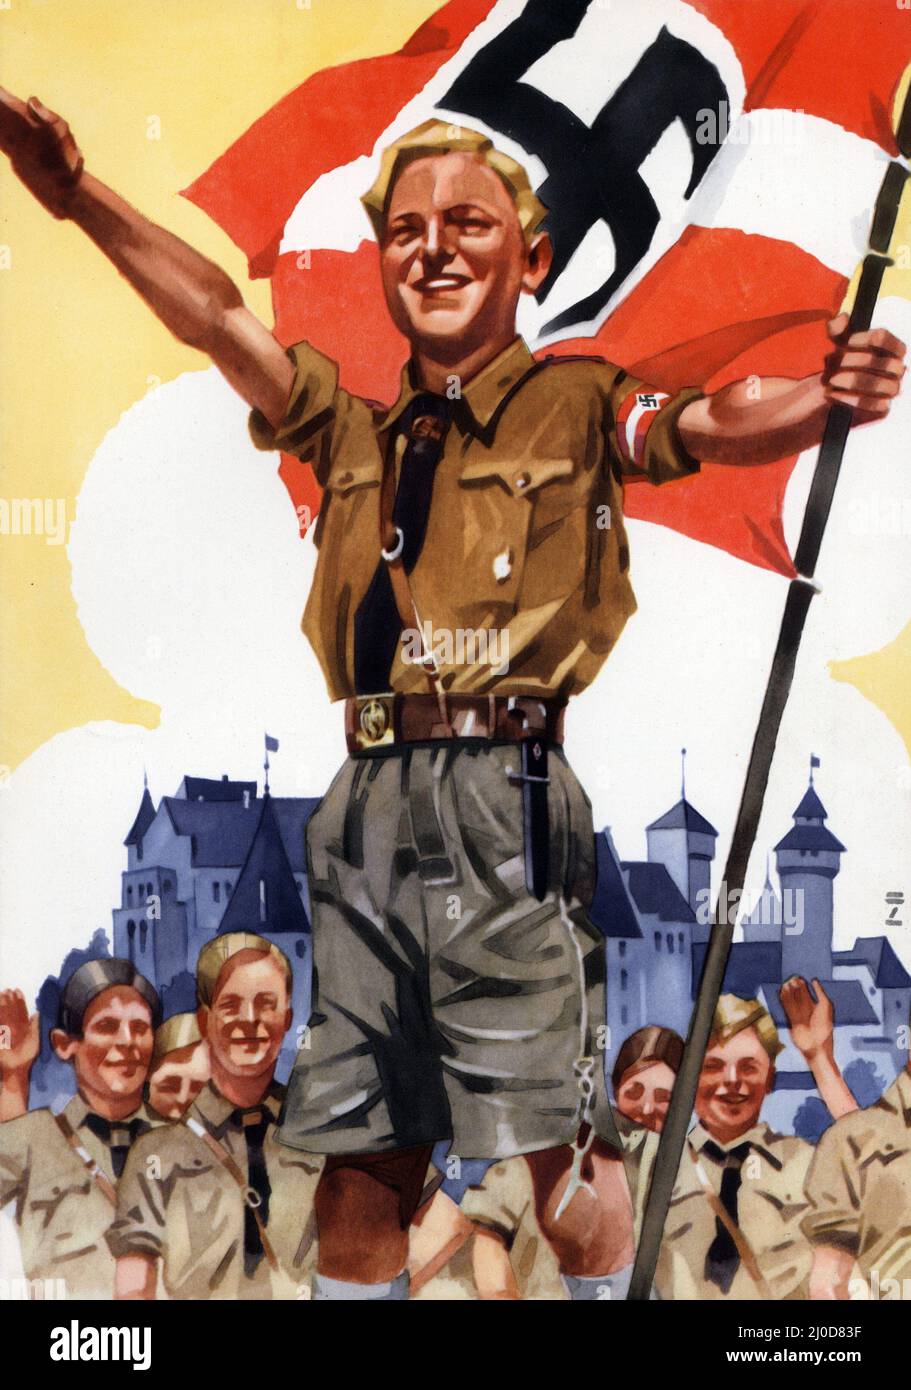 Nazi propaganda - Front cover of a decorative telegram folder in colour from Deutsche Reichspost 1936 by German poster artist Ludwig HOHLWEIN. Stock Photo